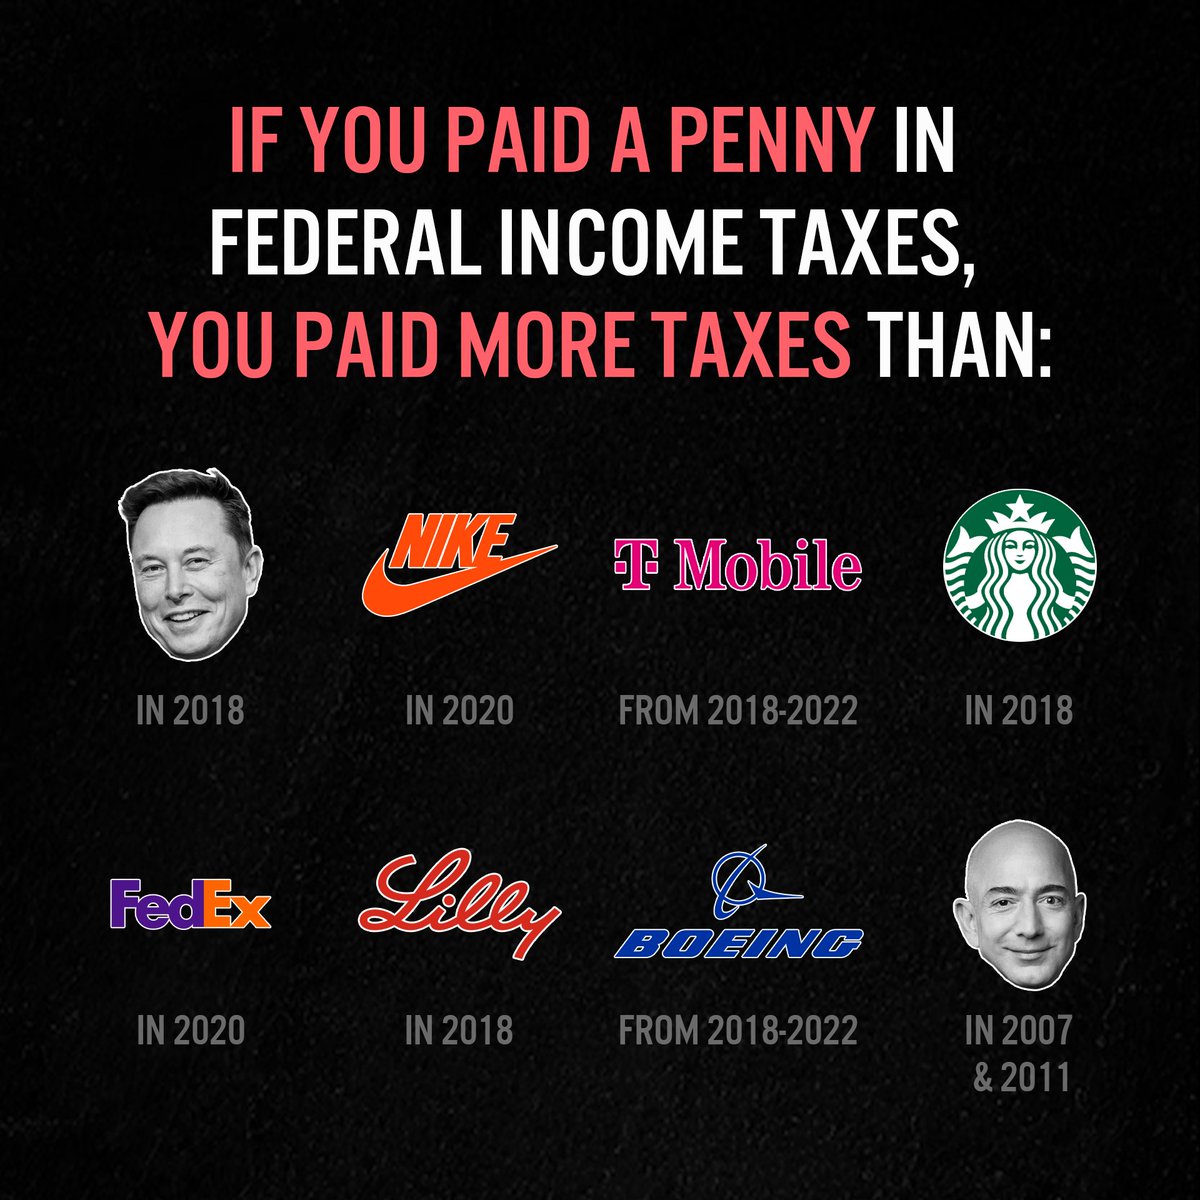 This #TaxDay, millions of working families are paying their fair share in taxes. But billionaires and giant corporations will get away with paying  little or nothing. It's time for our tax code to reward work, not just wealth.